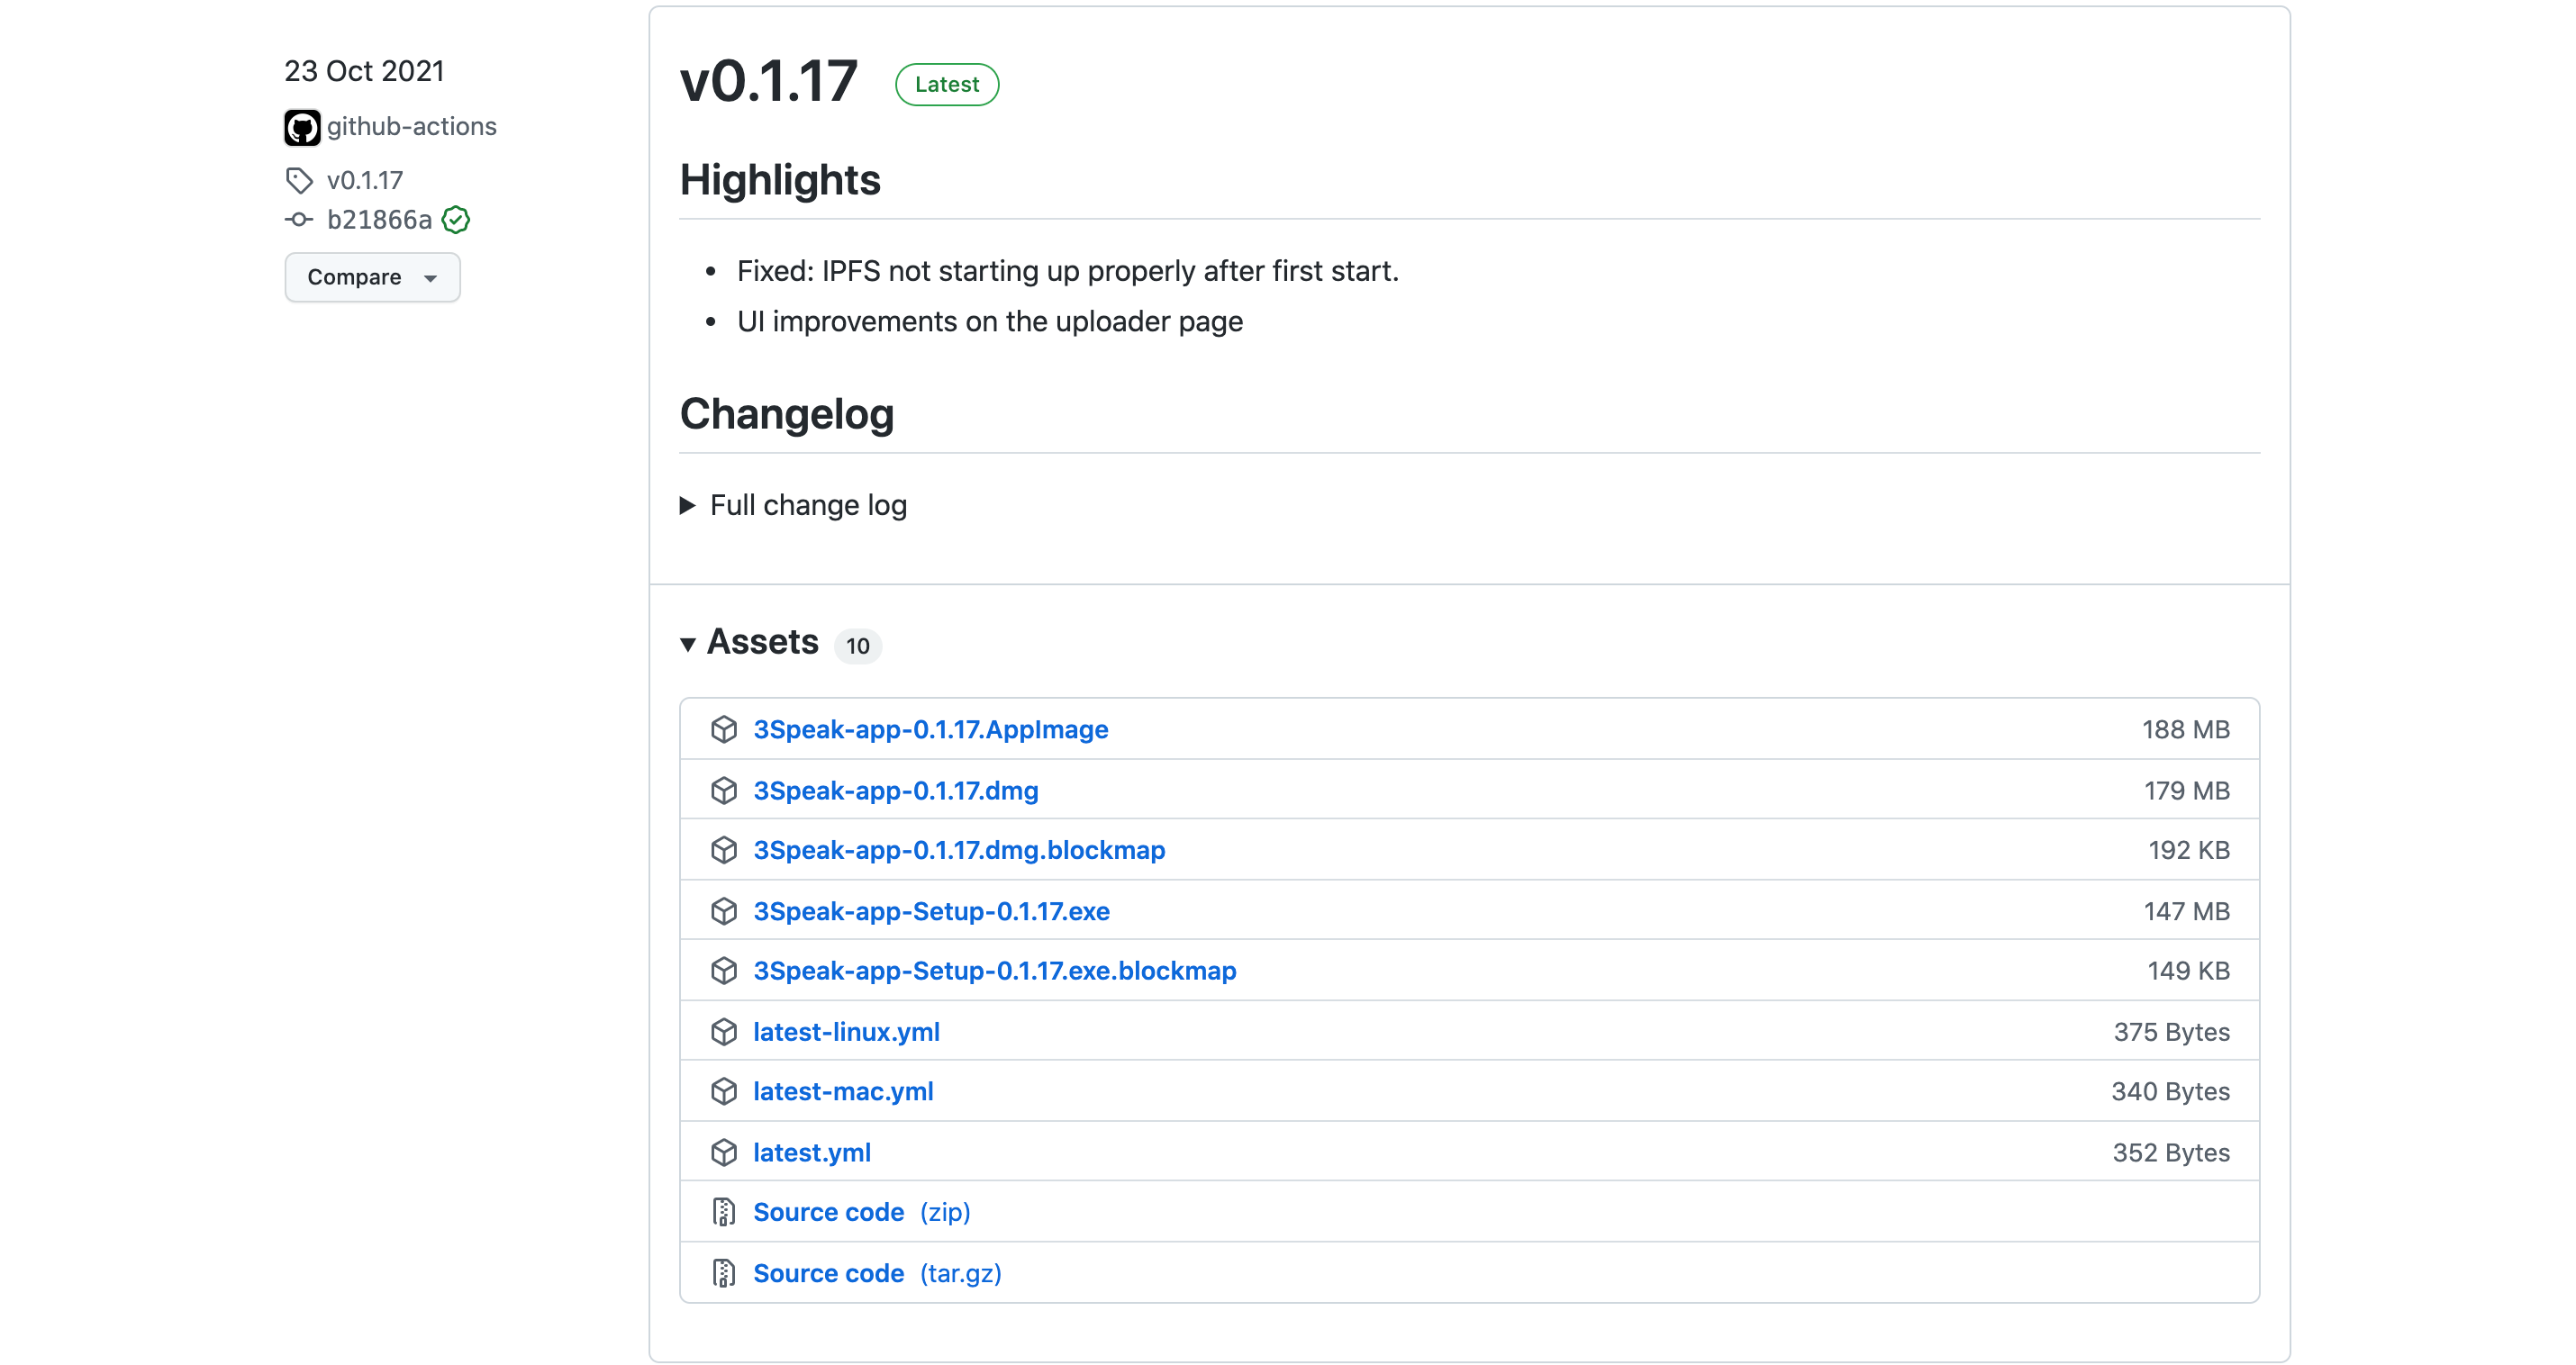 The assets section of the 3Speak desktop app latest release GitHub page.